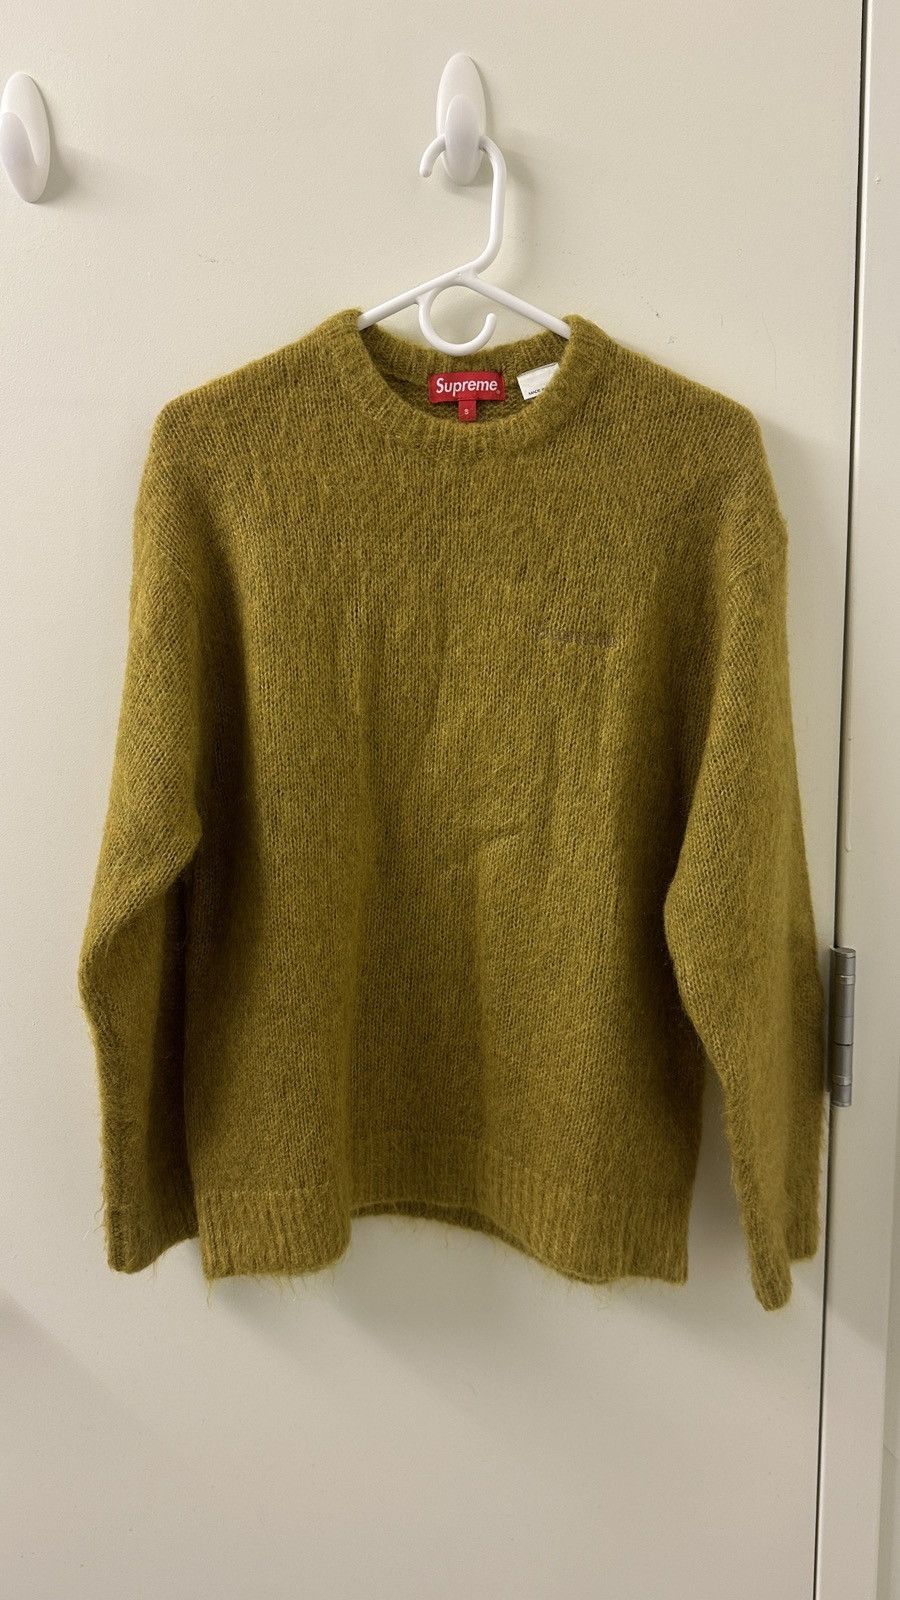 Supreme Mohair Sweater | Grailed